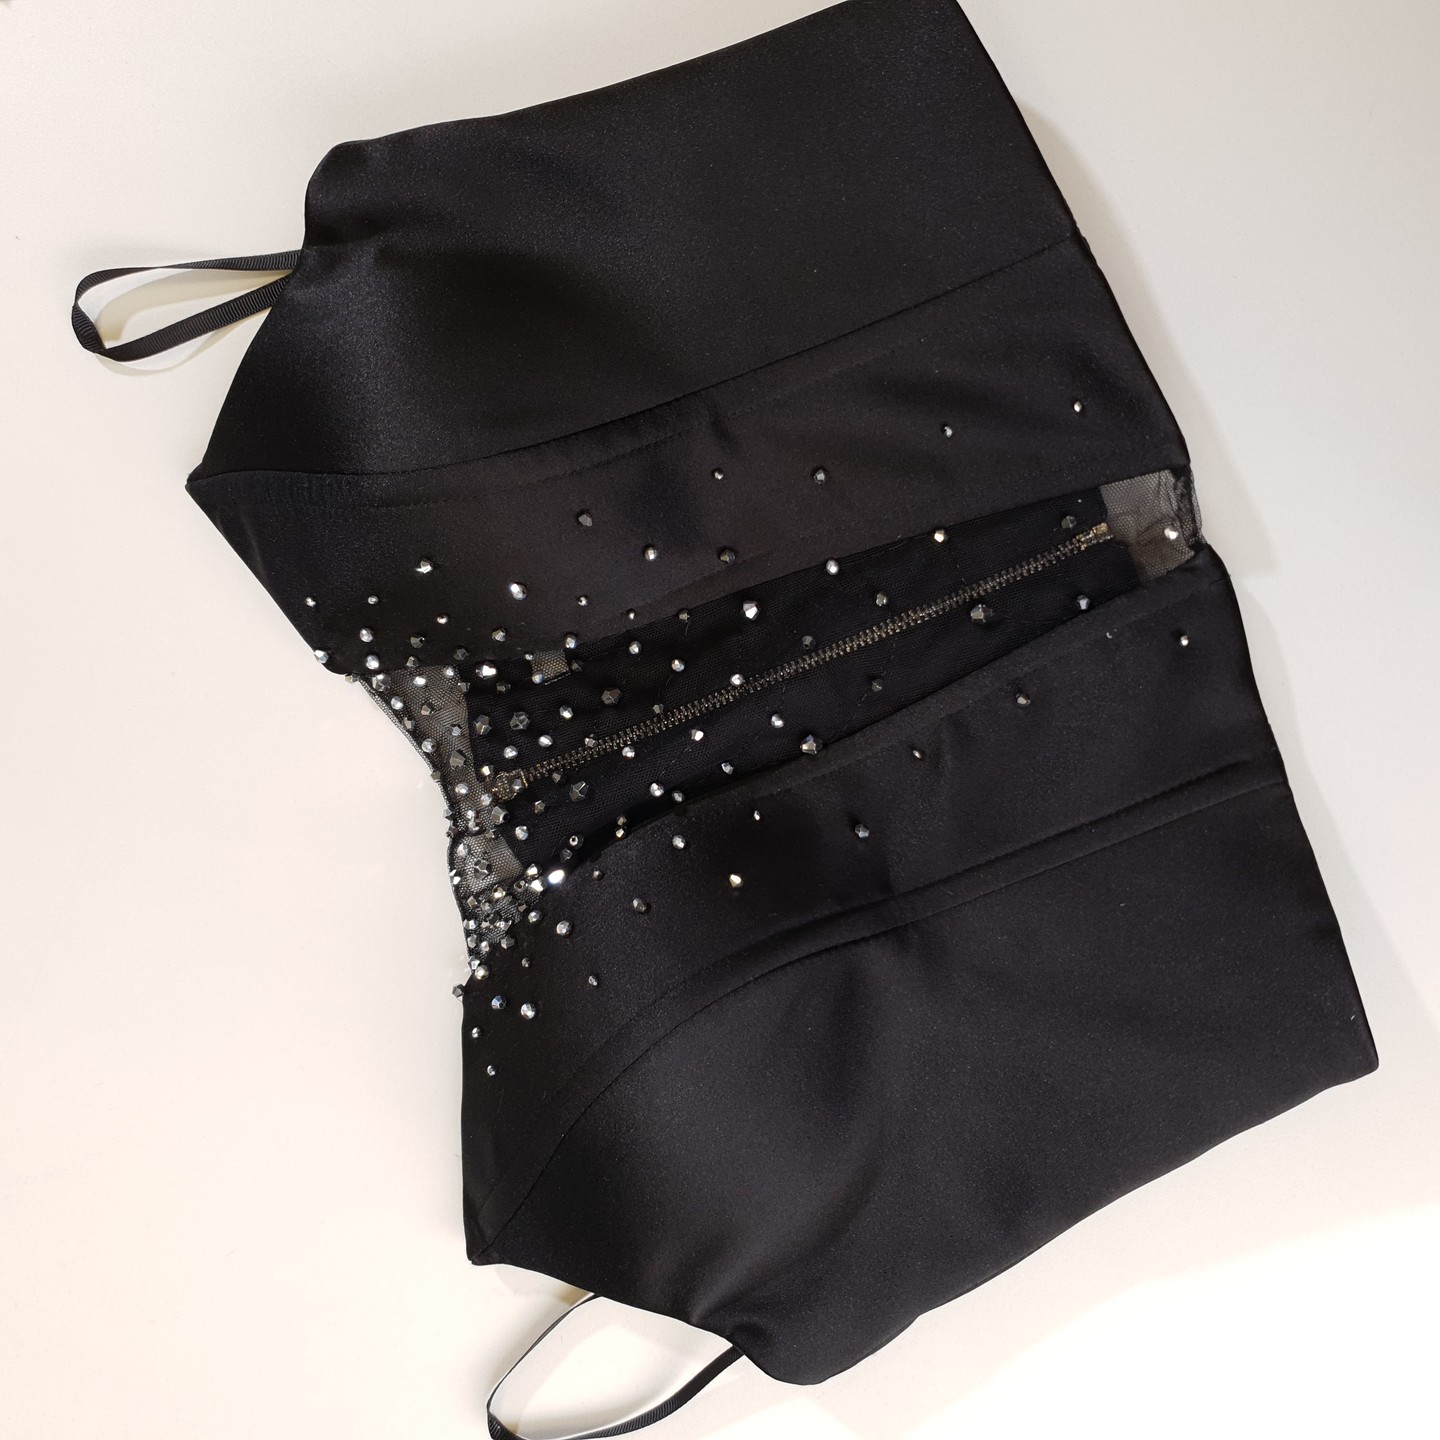 Beaded bustier, 2021, couture, top, evening, black, black top and skirt #1, embroidery